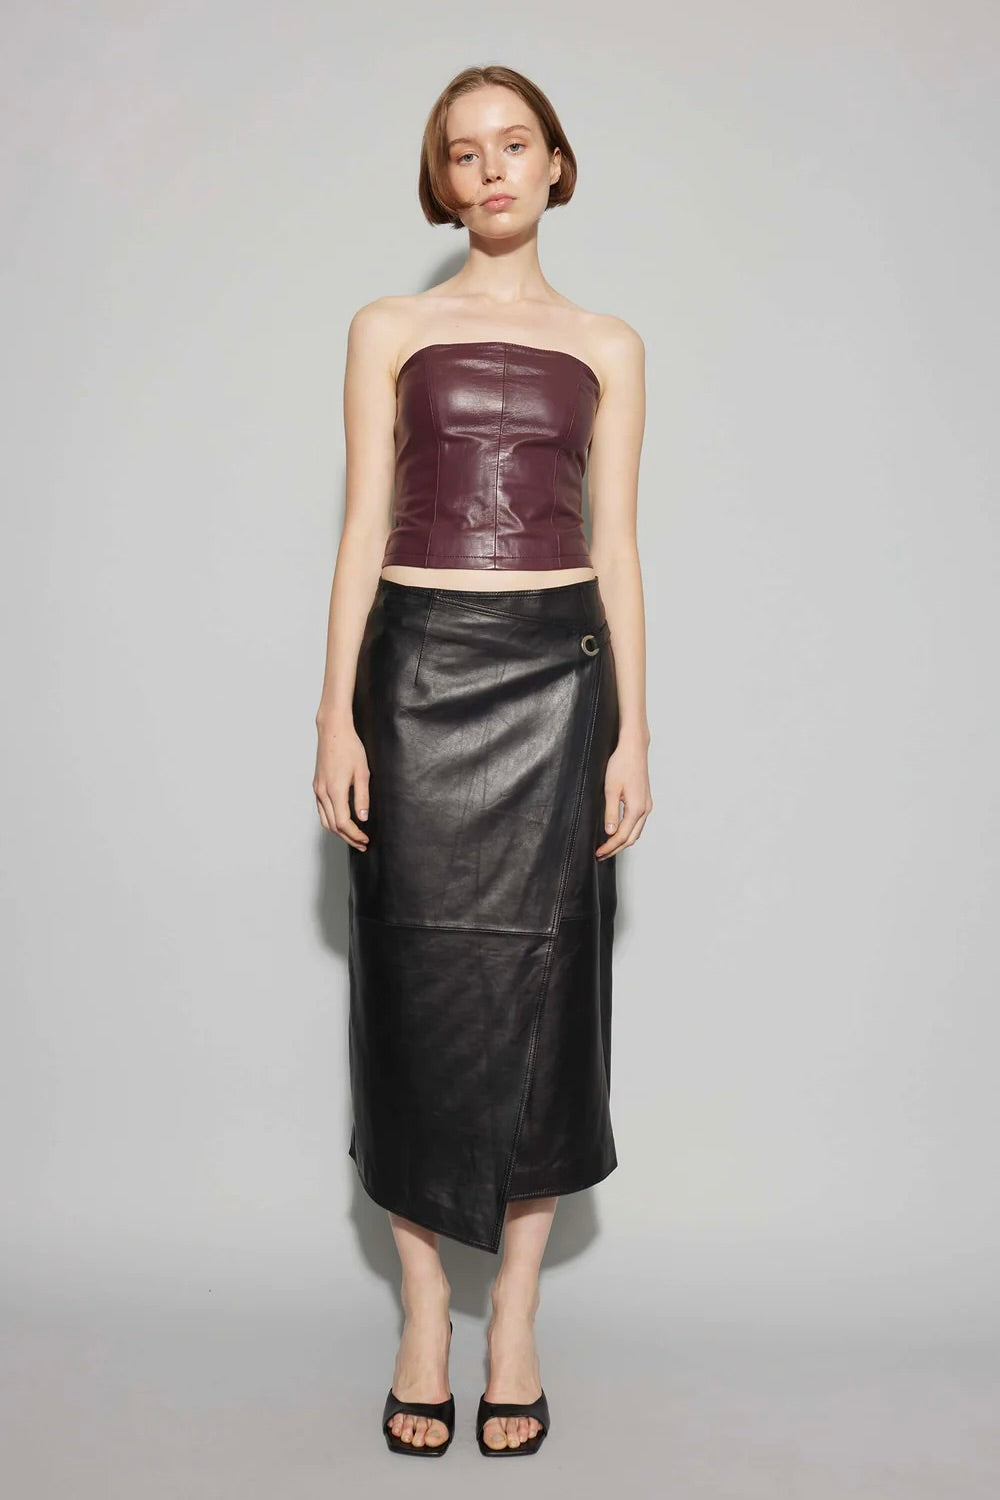 OVAL SQUARE - Reflection Leather Skirt - Dale